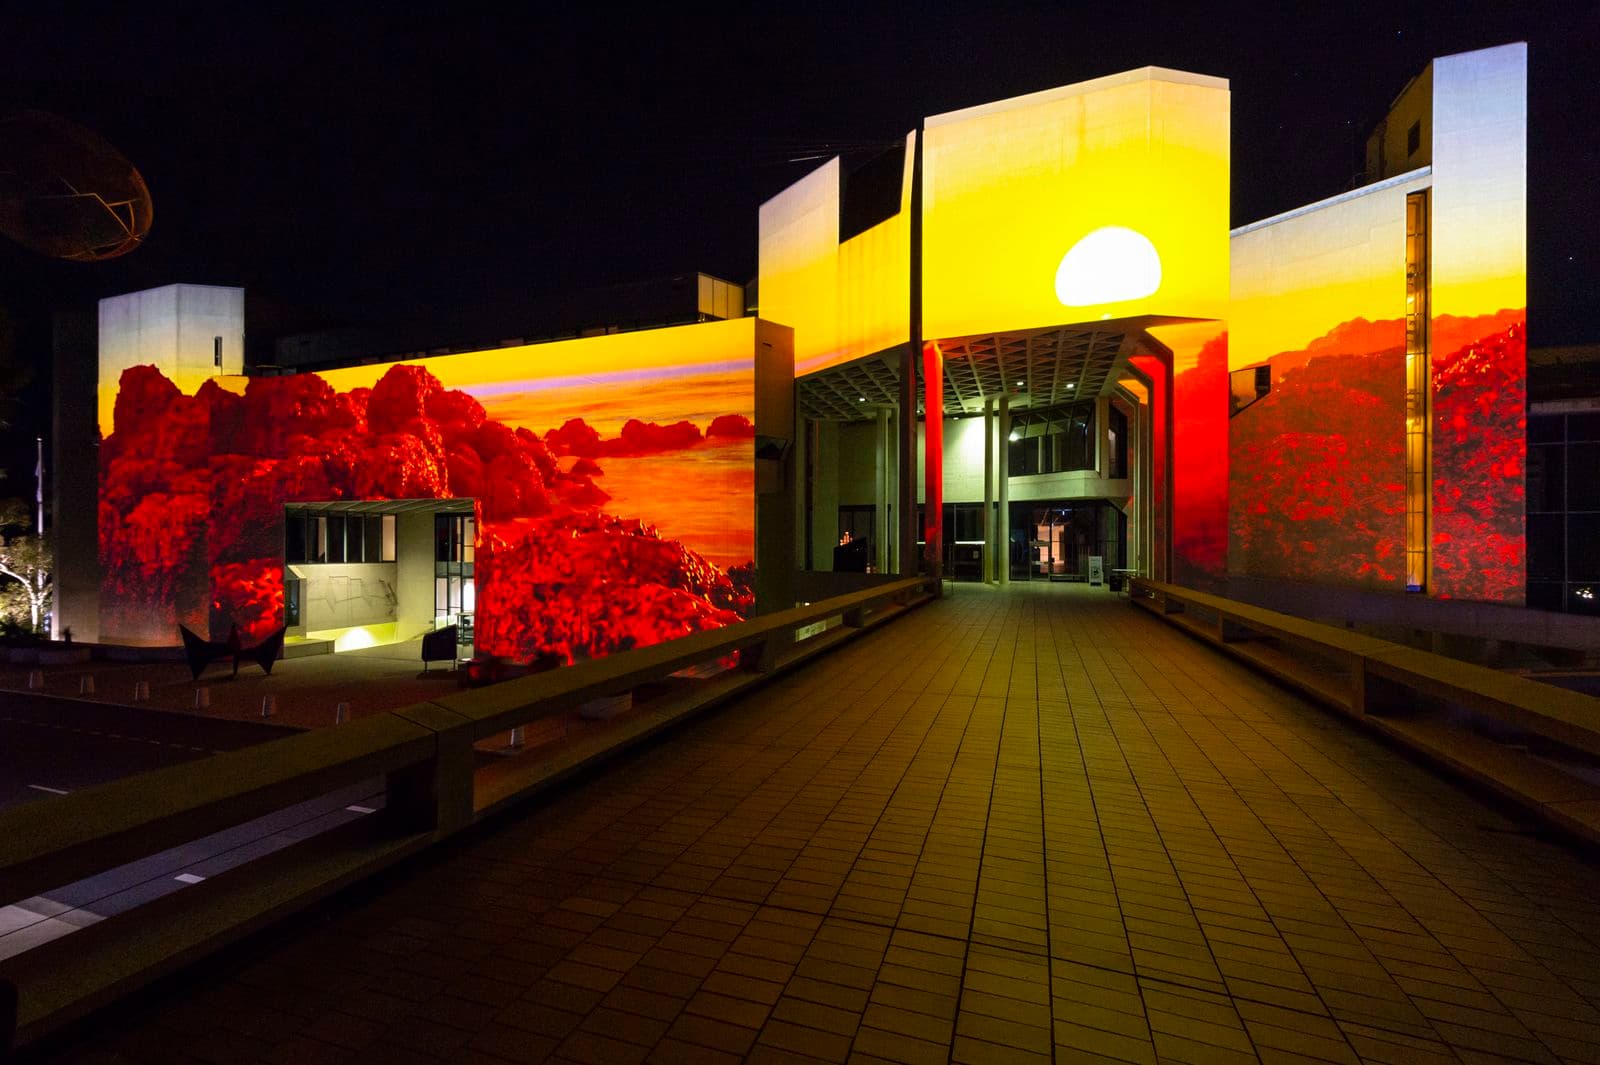 Projected image of the sun over a bush landscape on the side of the NGA building